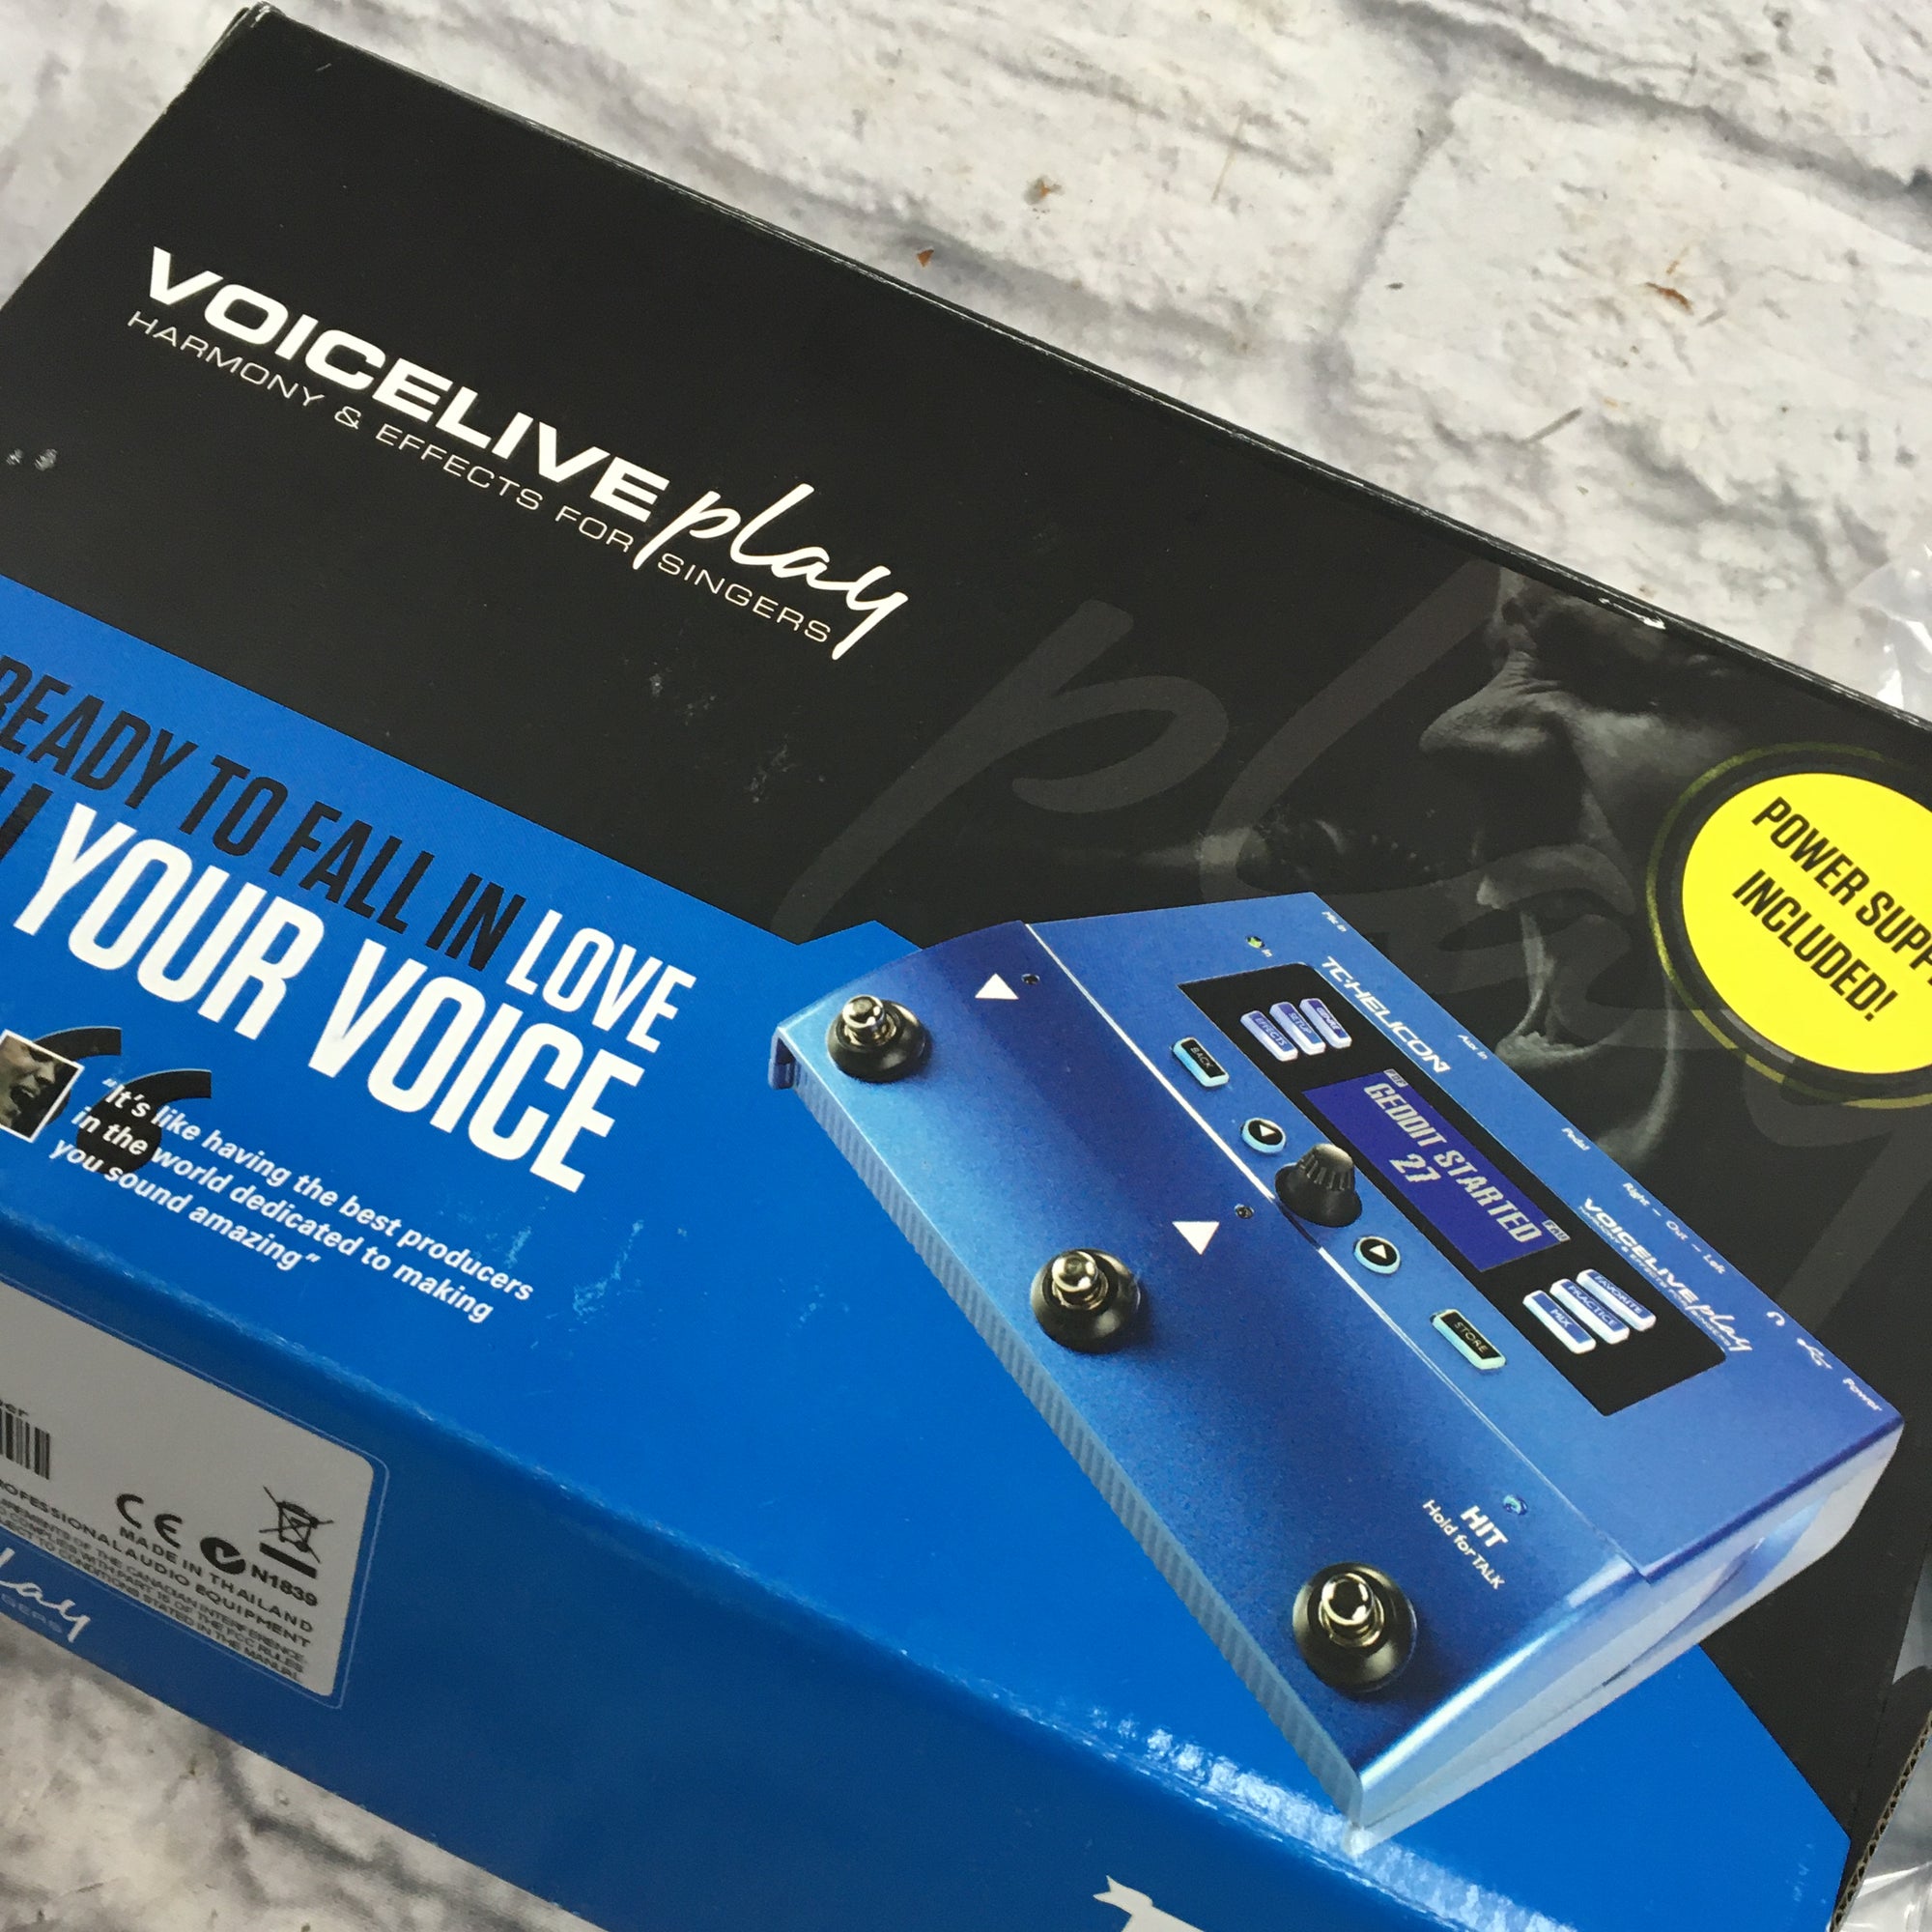 TC-Helicon VOICELIVE PLAY Vocal Harmony And Effects Processor